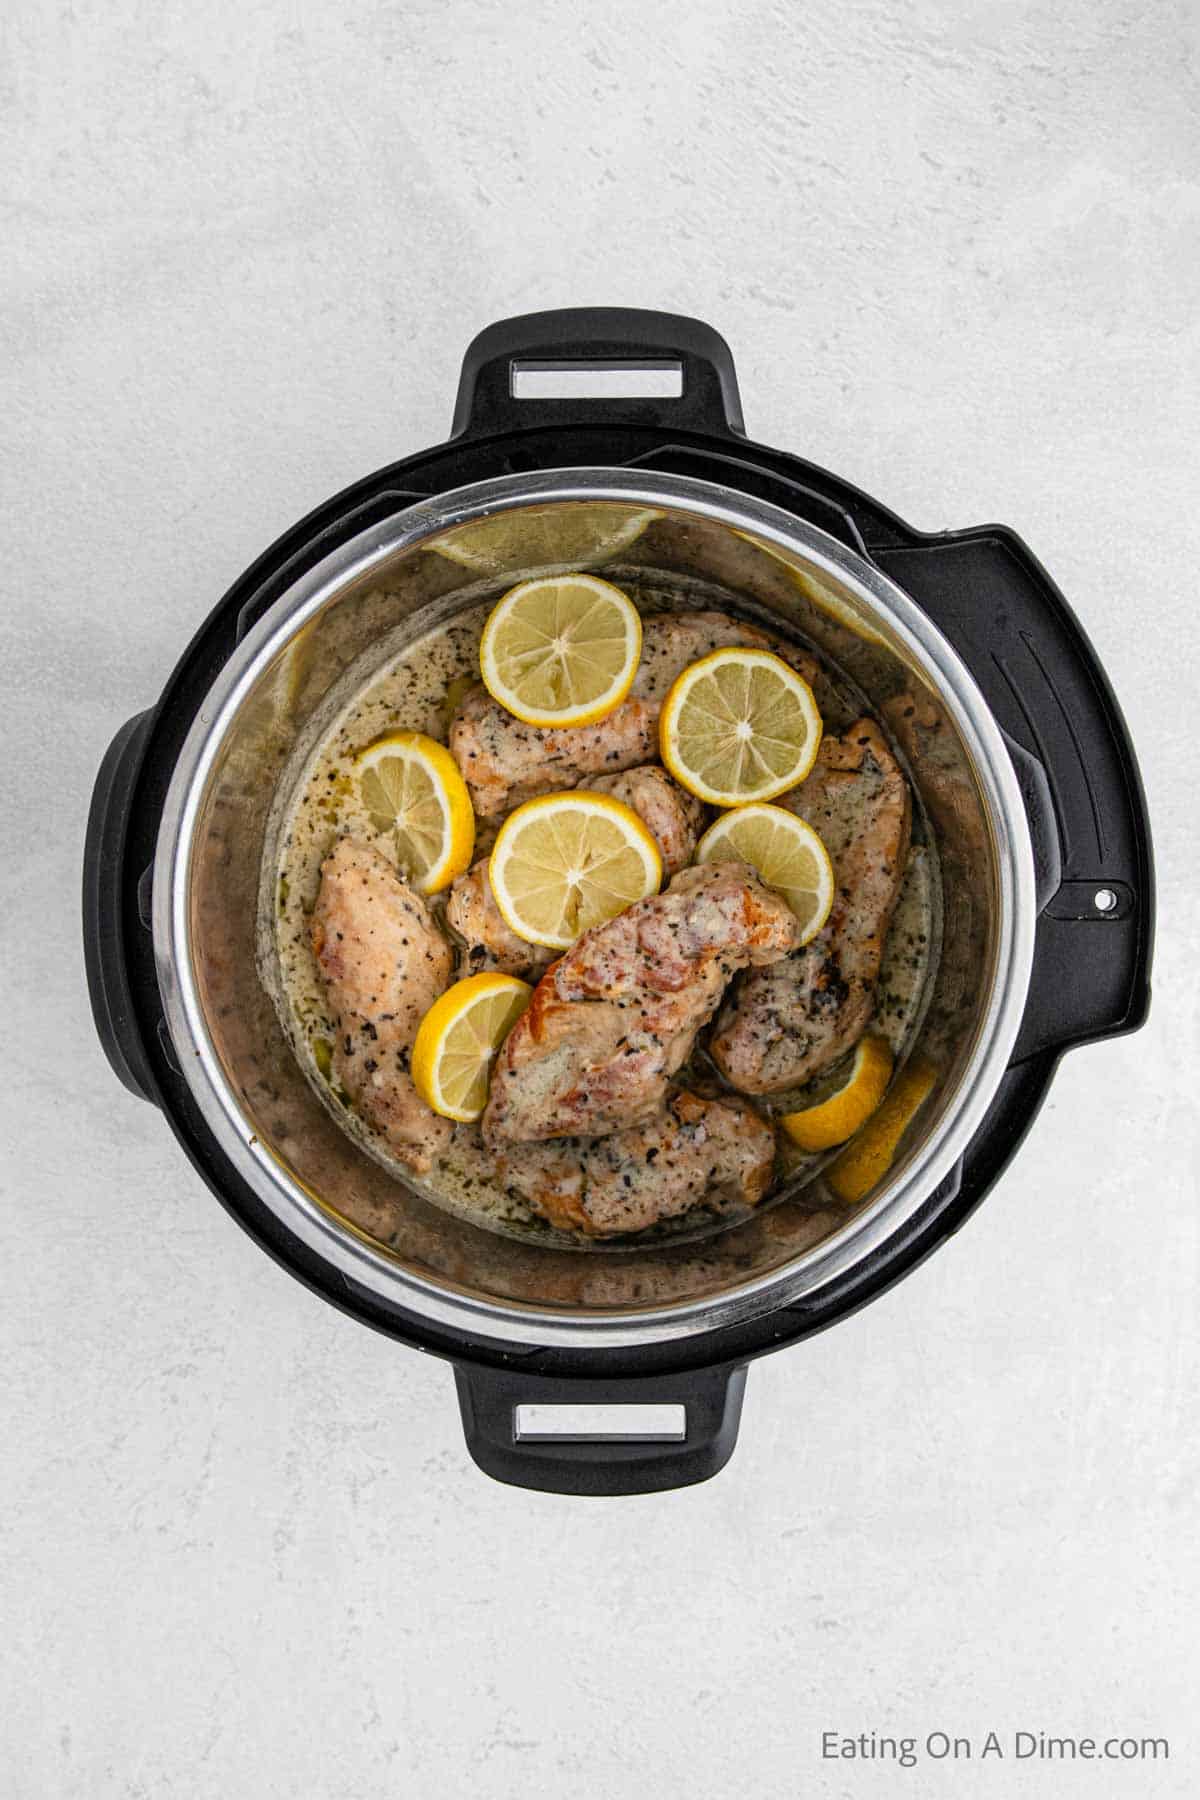 Cooked lemon chicken in the instant pot